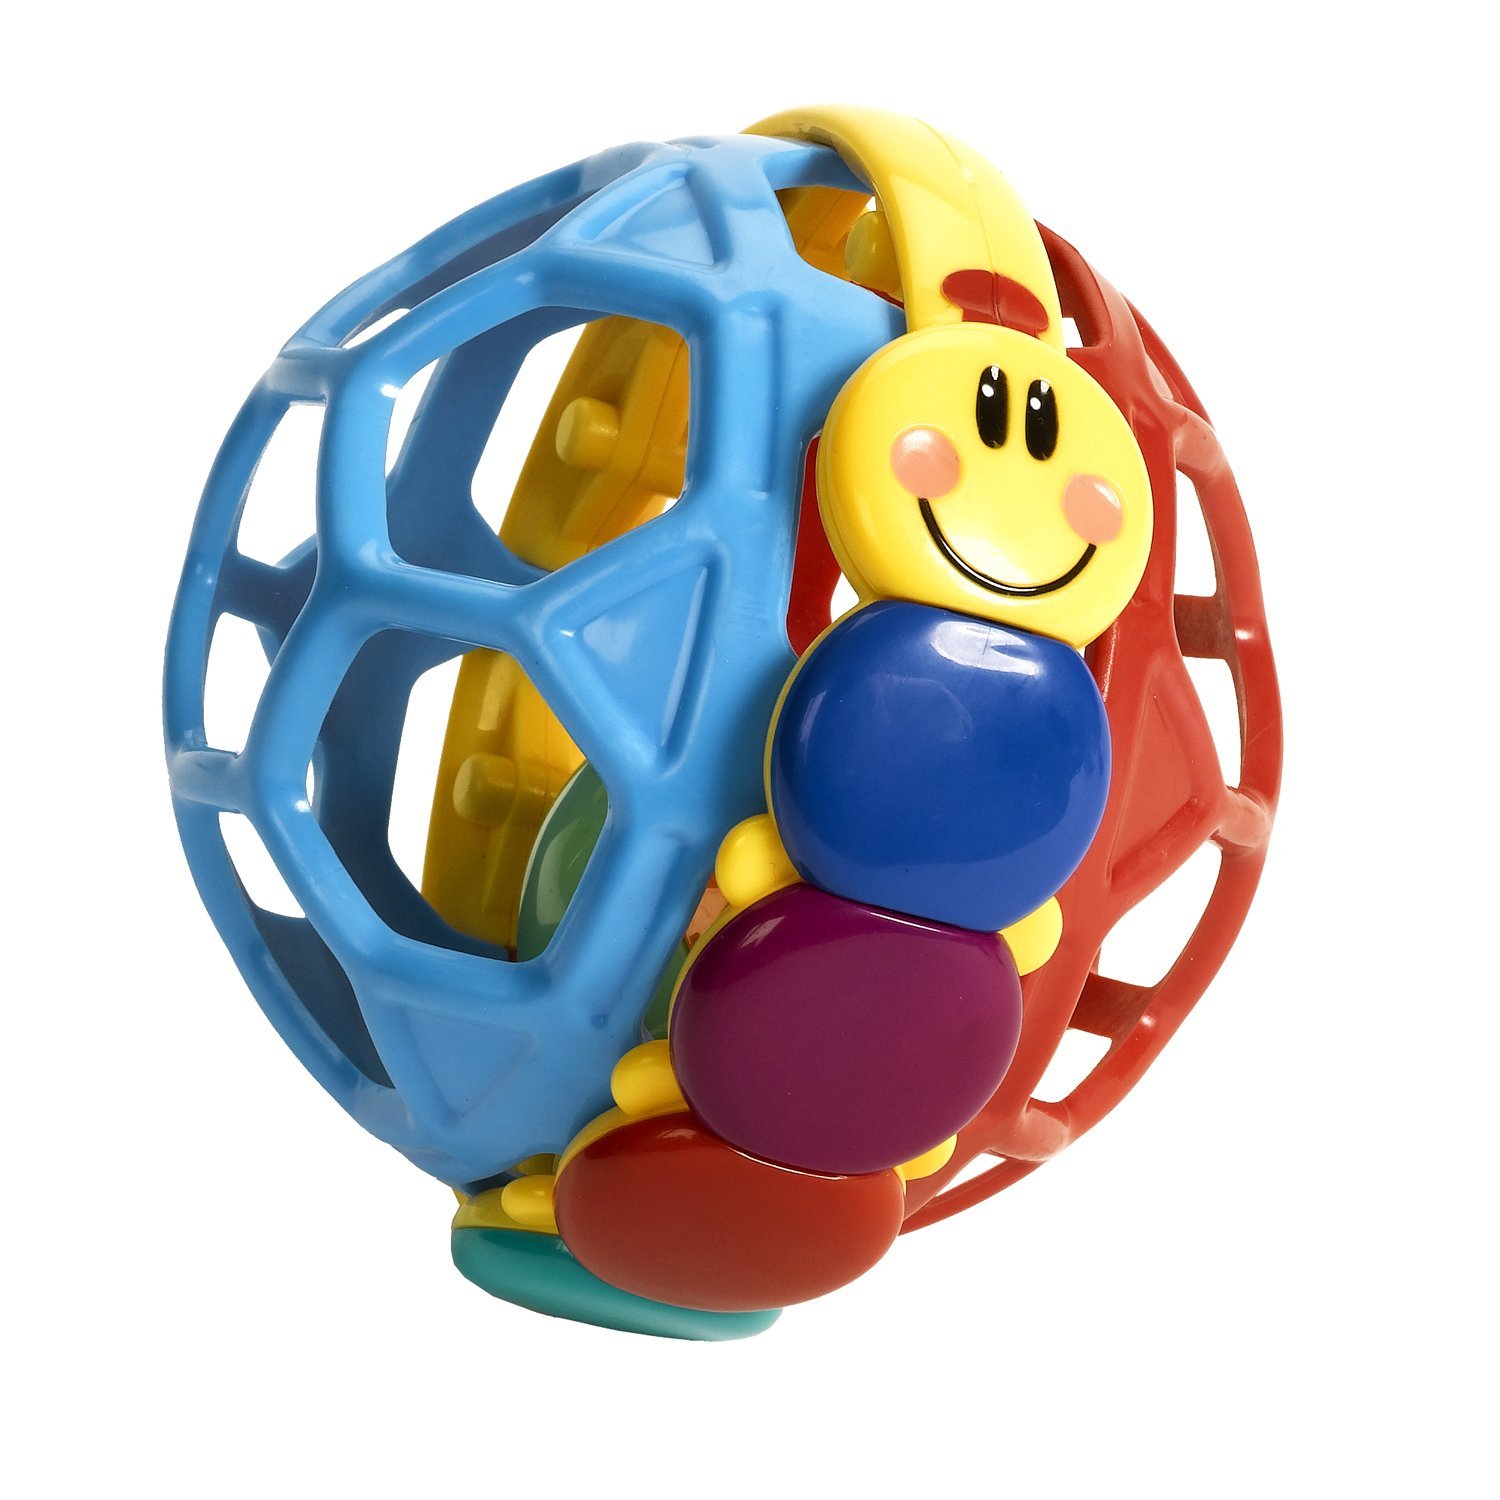 Review of Baby Einstein Bendy Ball